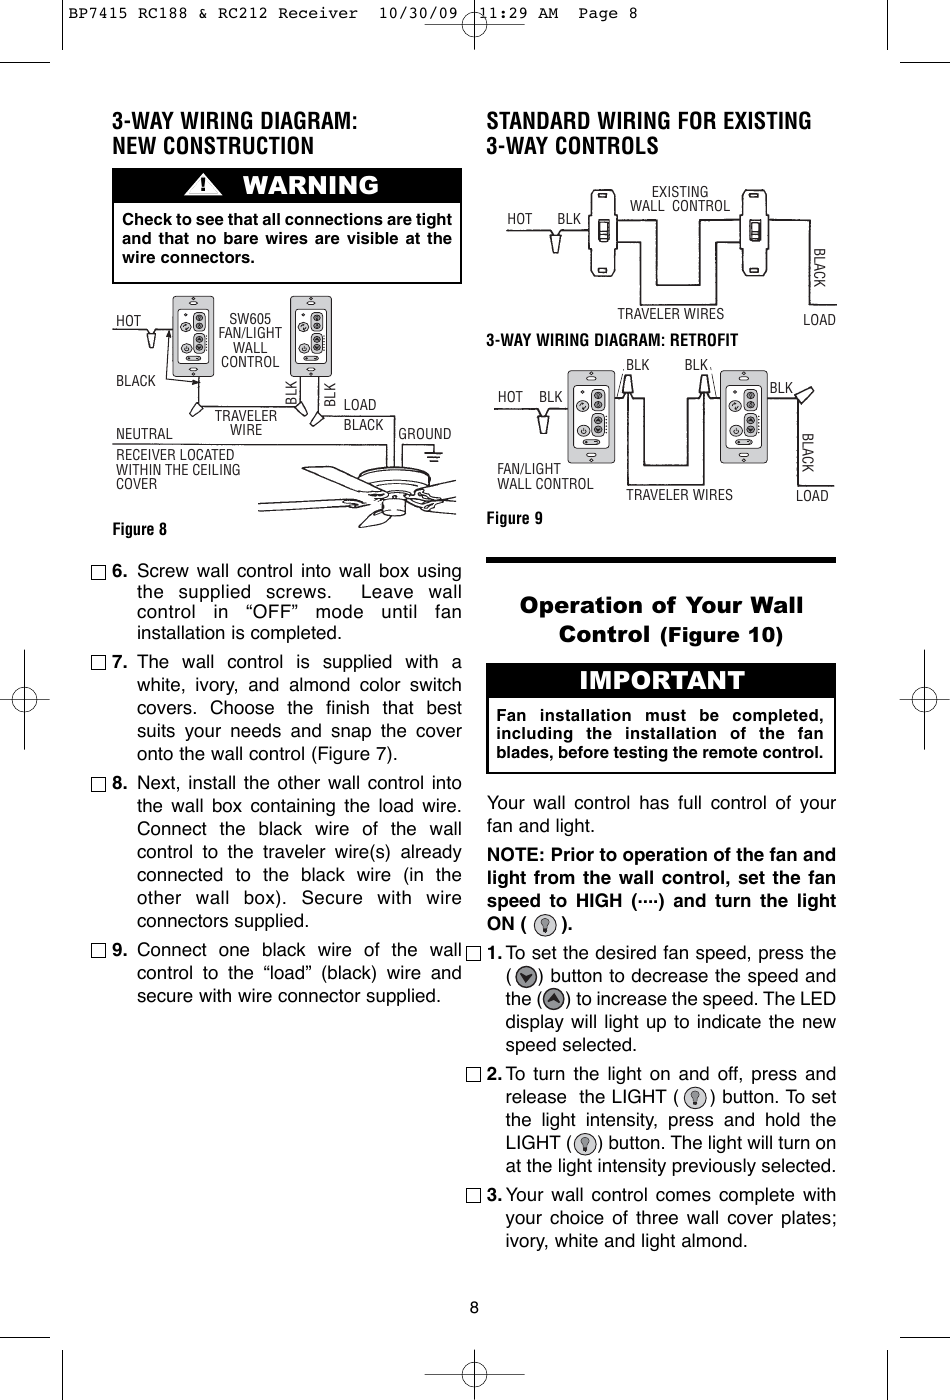 Page 8 of 12 - Emerson Emerson-Rc188-Owners-Manual- BP7415 RC188 & RC212 Receiver  Emerson-rc188-owners-manual